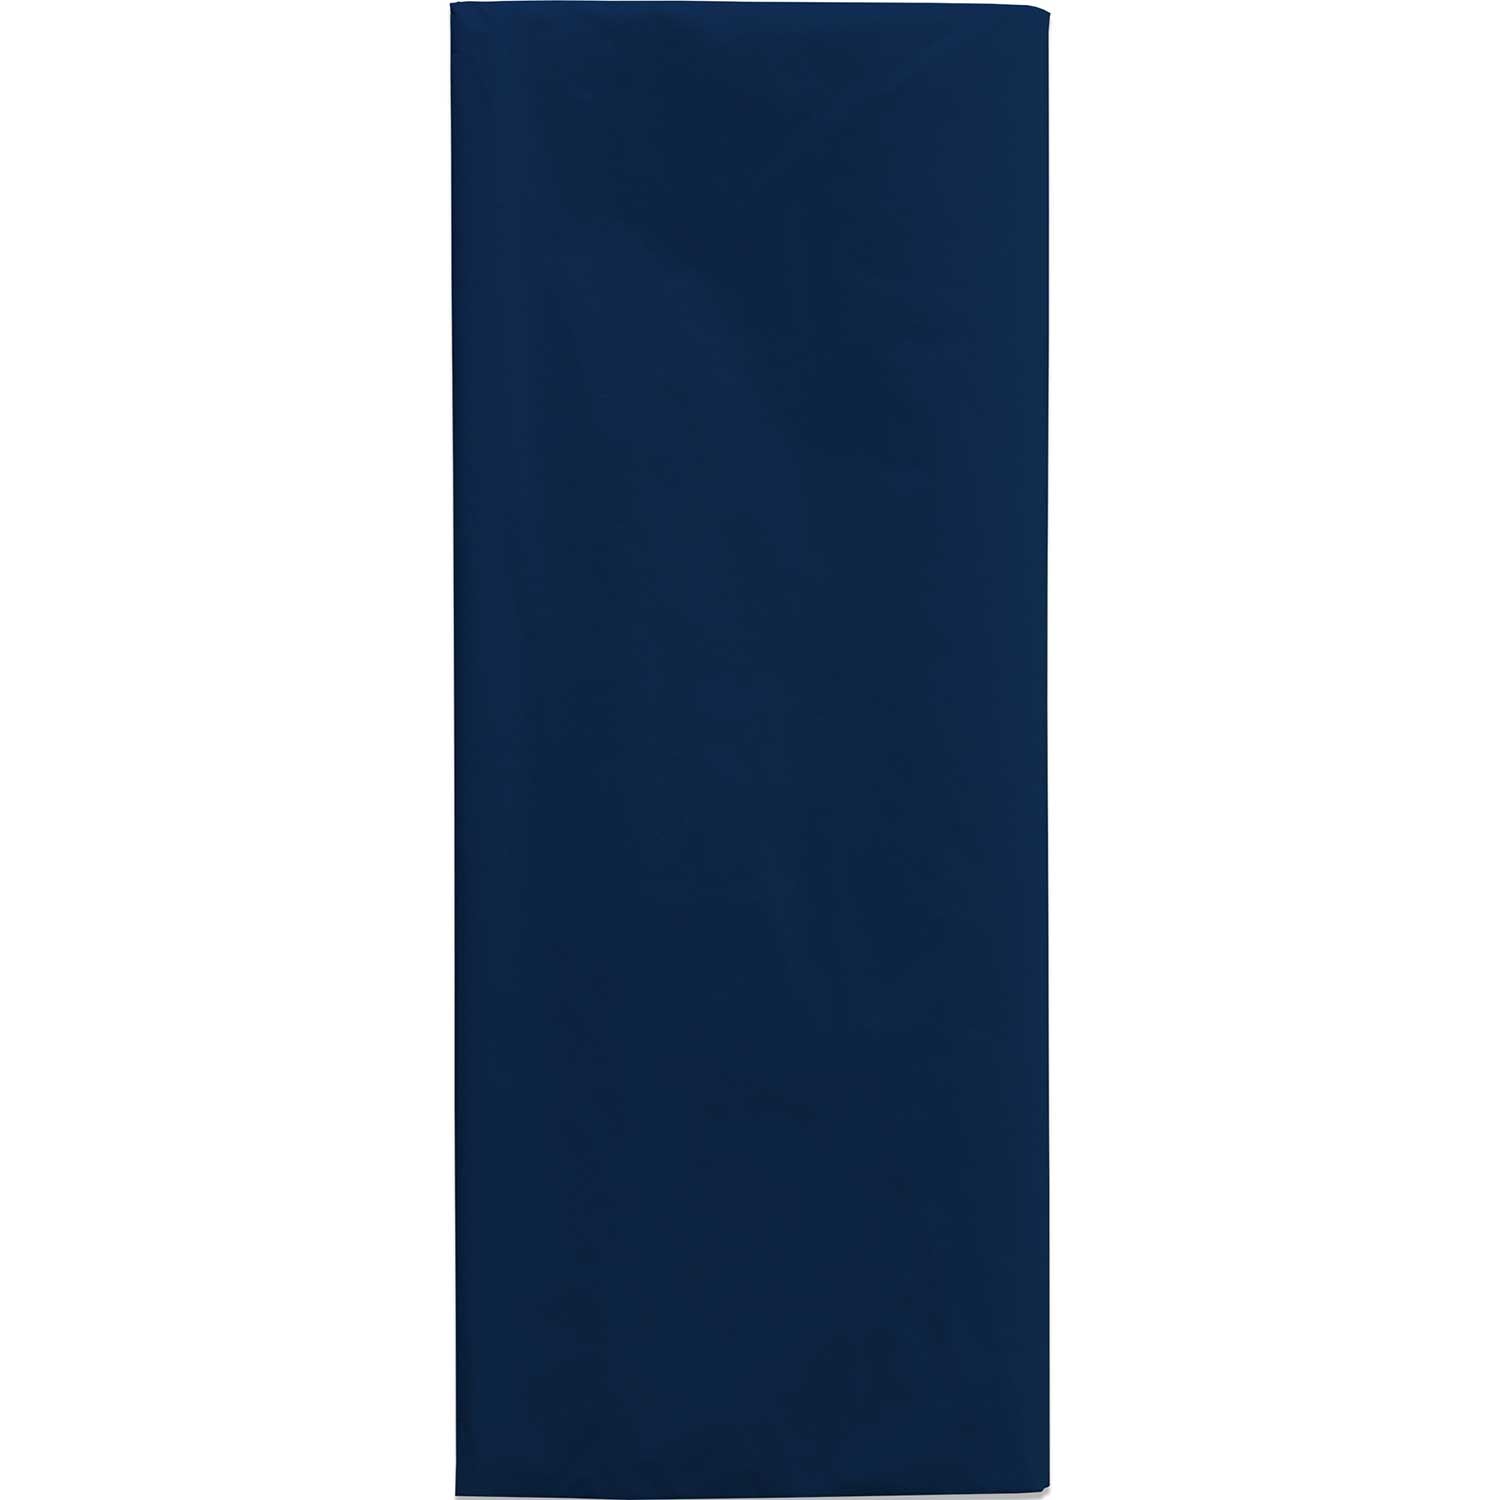 IG Design Solid Gift Tissue Sheets - Navy, 8 ct - Shop Gift Wrap